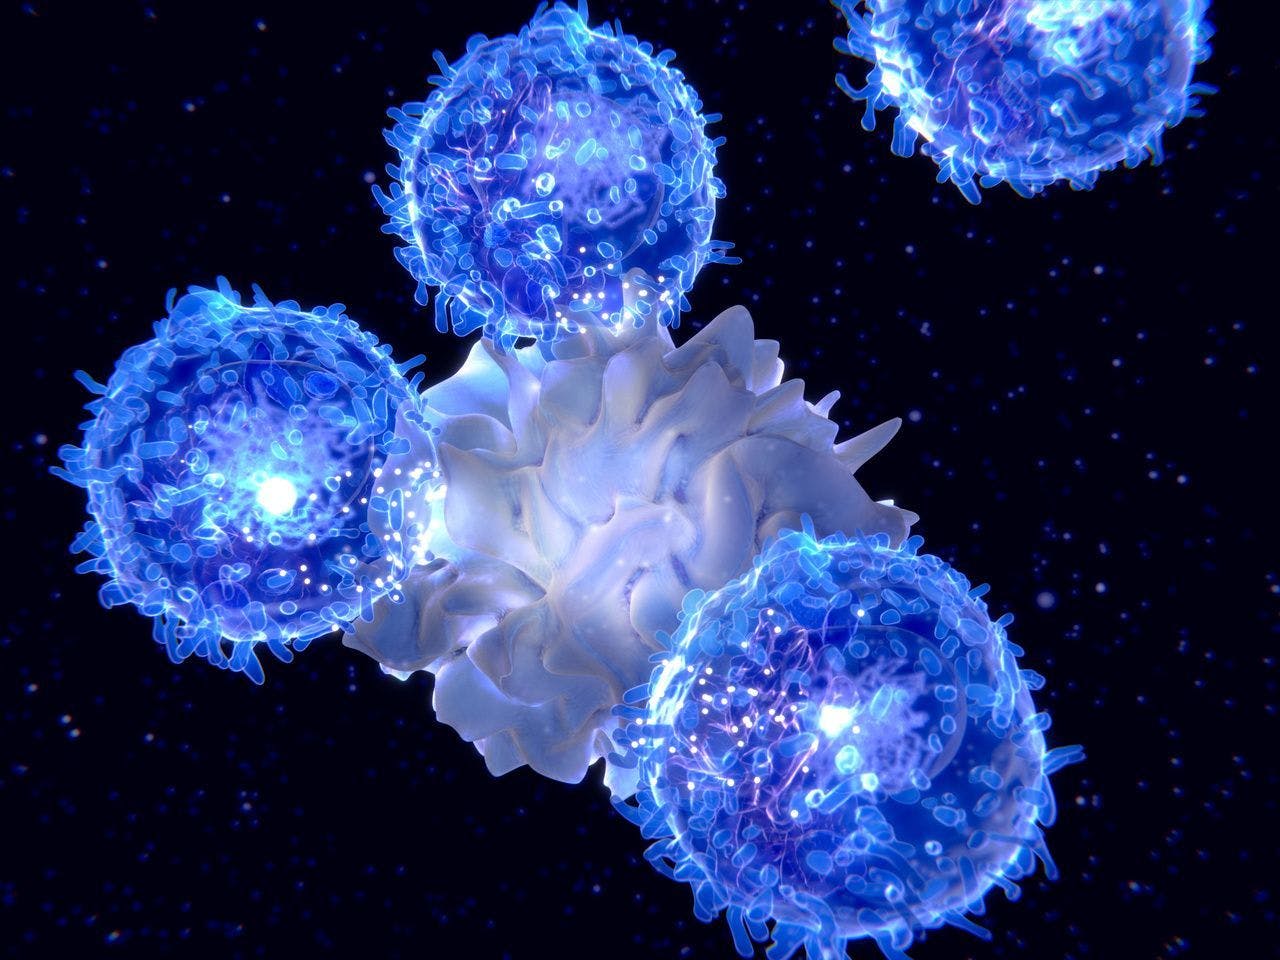 New Epcoritamab Data Show Strong Results in B-Cell Lymphomas